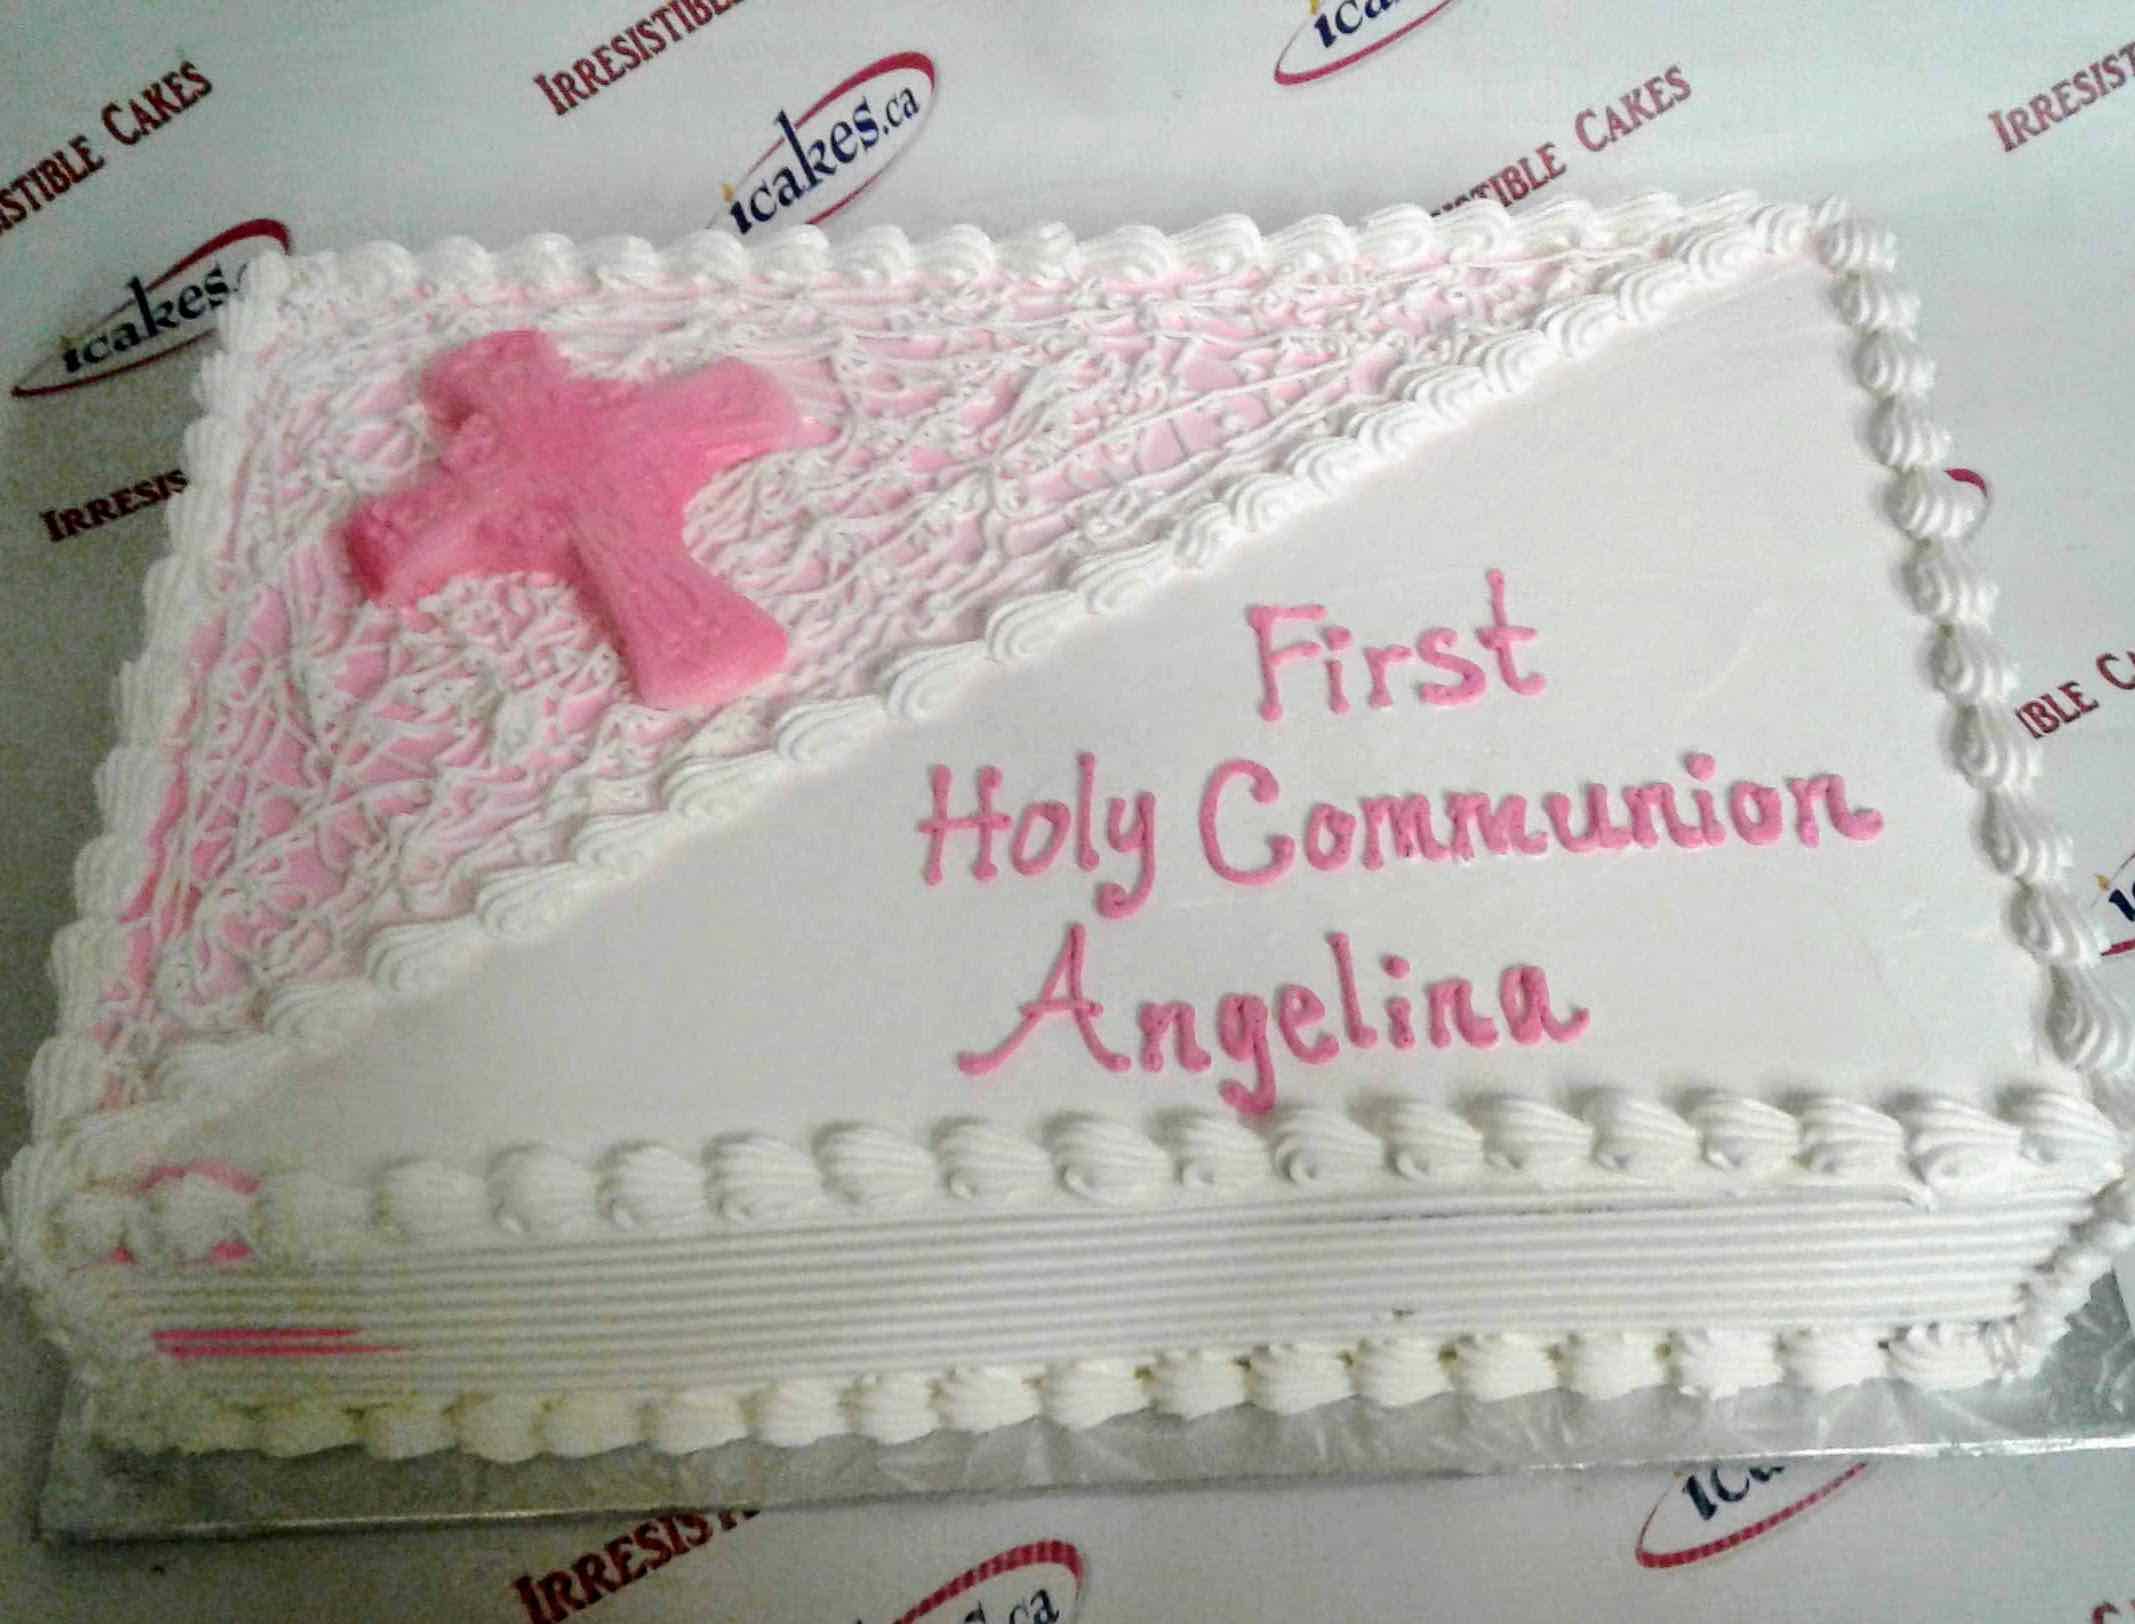 Personalised Confirmation Cake Topper Christian Church Baptism for Cake Any  Name | eBay